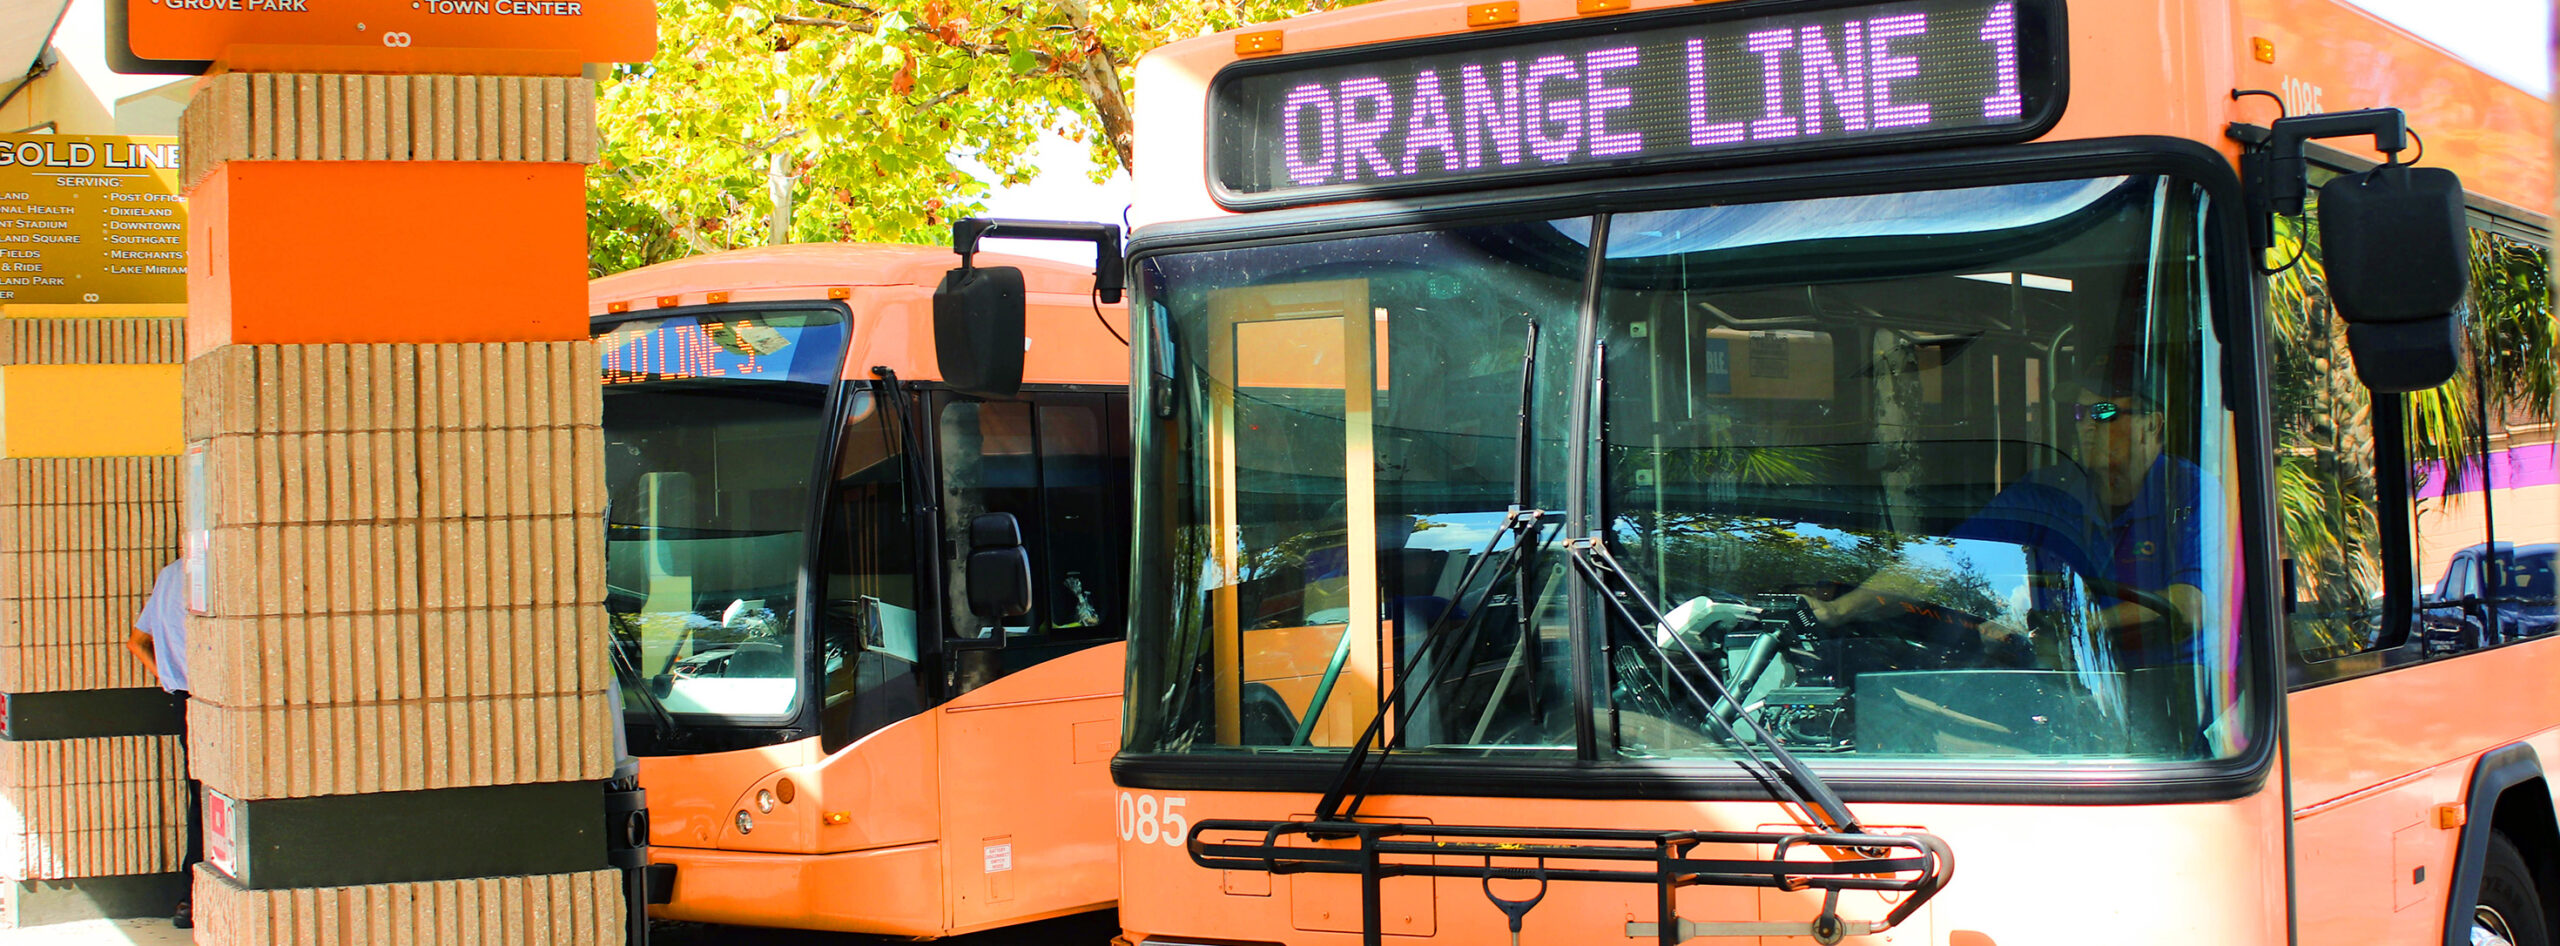 Masthead image - Citrus Connector buses parked.